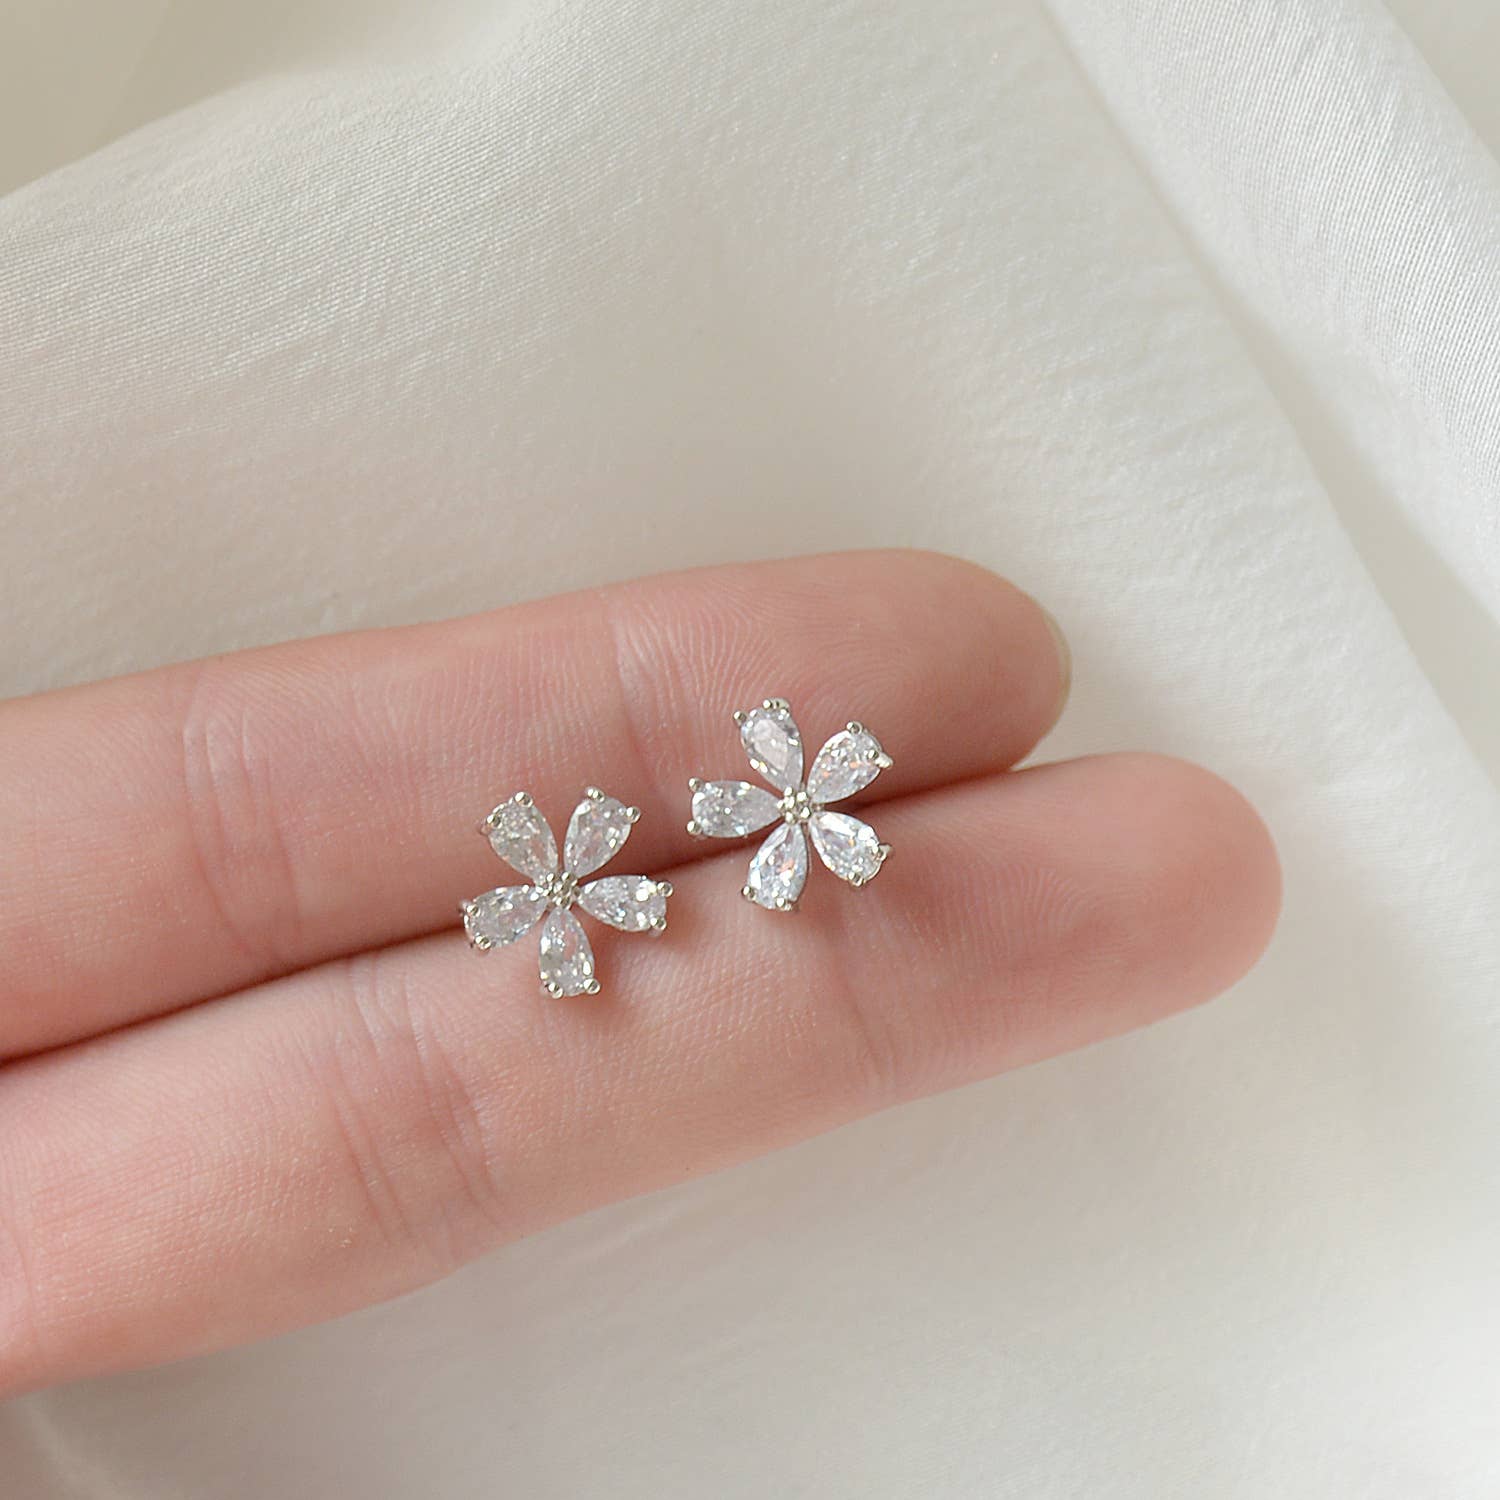 Sterling Silver and Cubic Zirconia Flower Stud Earring, Abigail Fox Jewelry Collection - Abigail Fox Designs